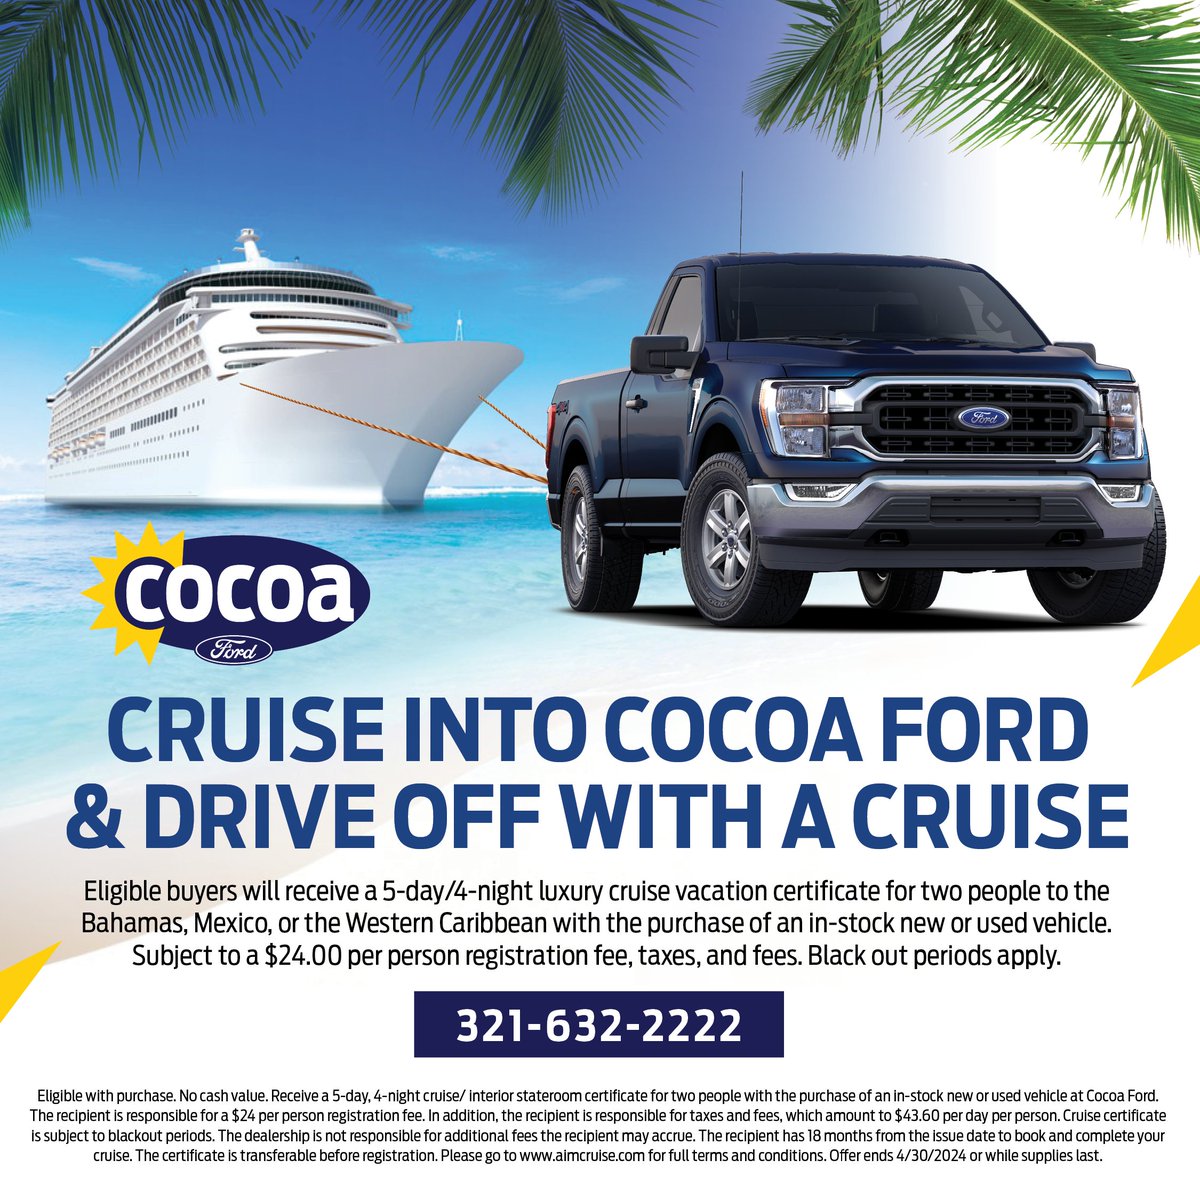 Cruise into Cocoa Ford and drive off with a Cruise! 🚗💨 🛳️ Limited time offer - while supplies last *See store for details
 #CocoaFord #CruiseIntoCocoaFordandDriveOffWithaCruise   #CarsCostLessatCocoaFord #FastestGrowingDealershipinBrevardCounty  

cocoafordfl.com/cocoa-special-…